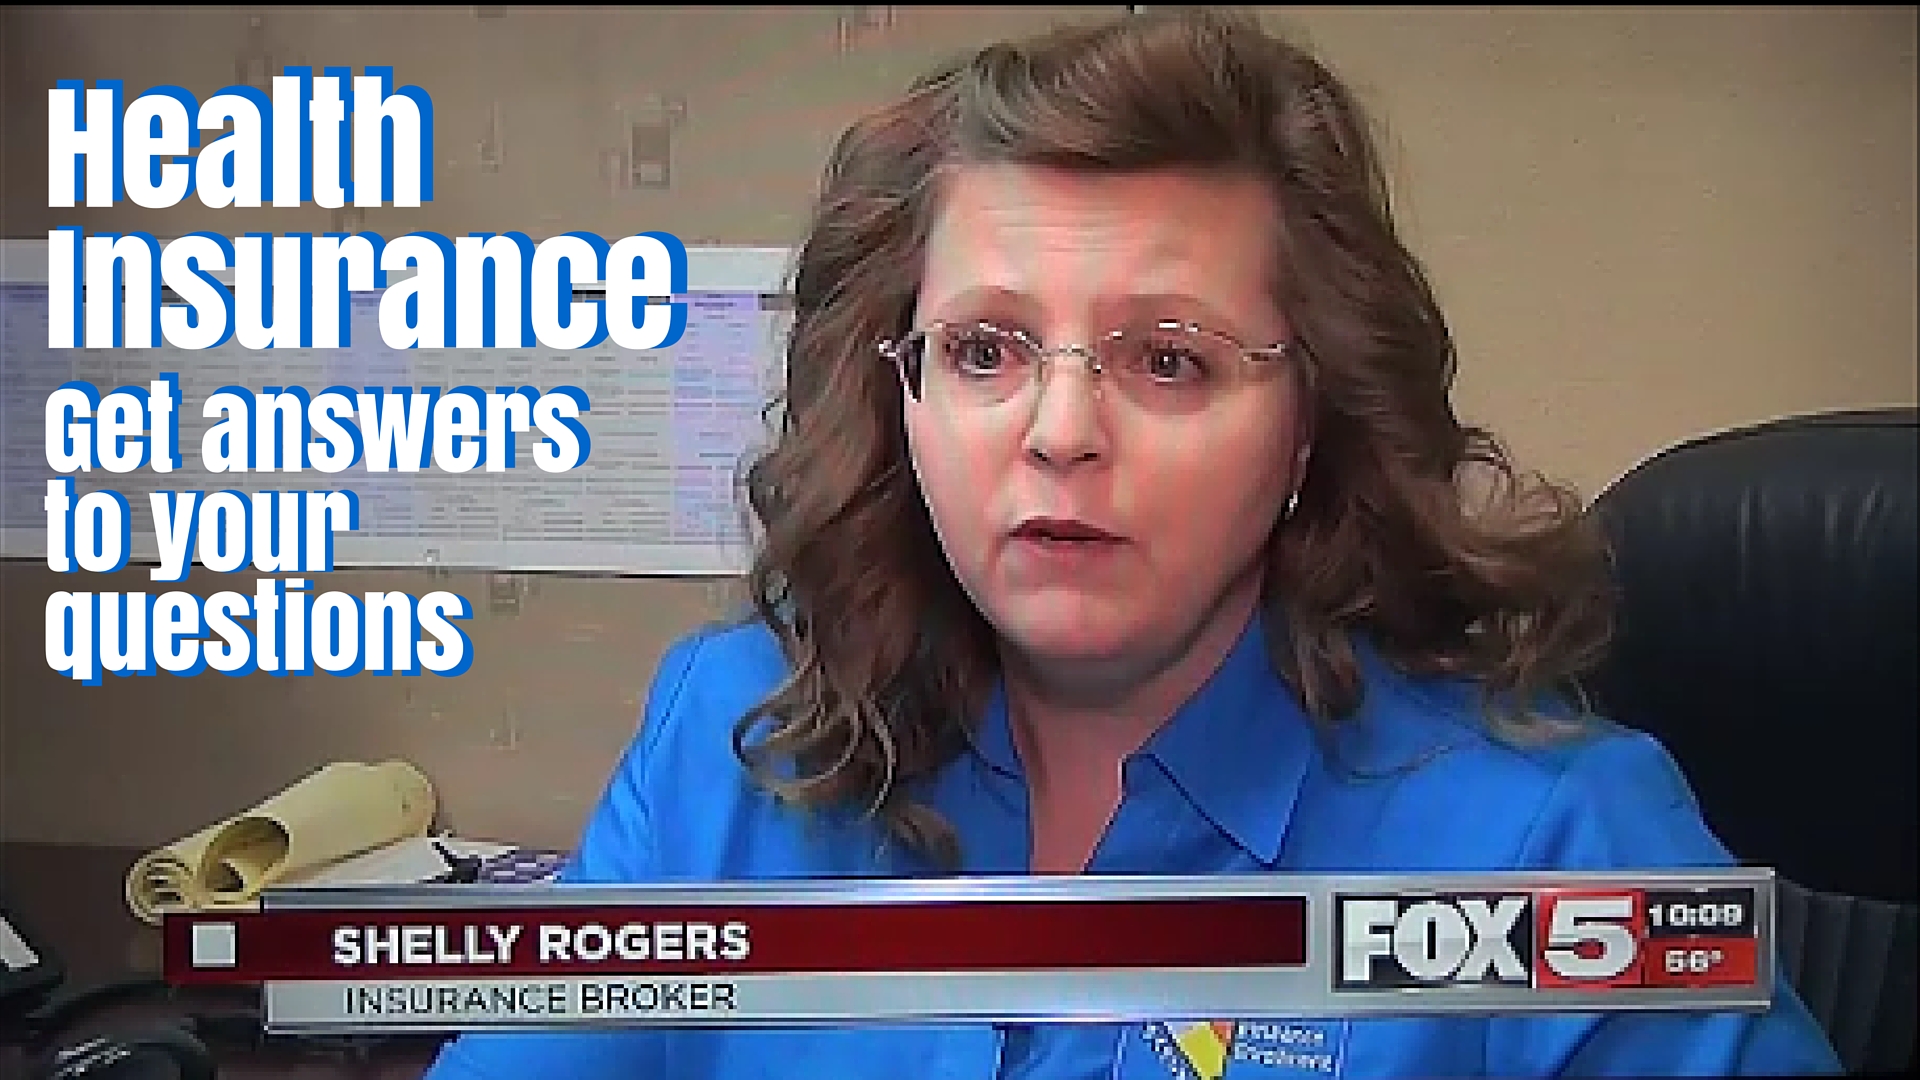 FOX 5 Las Vegas expert interview with Shelly Rogers from Nevada Insurance Enrollment